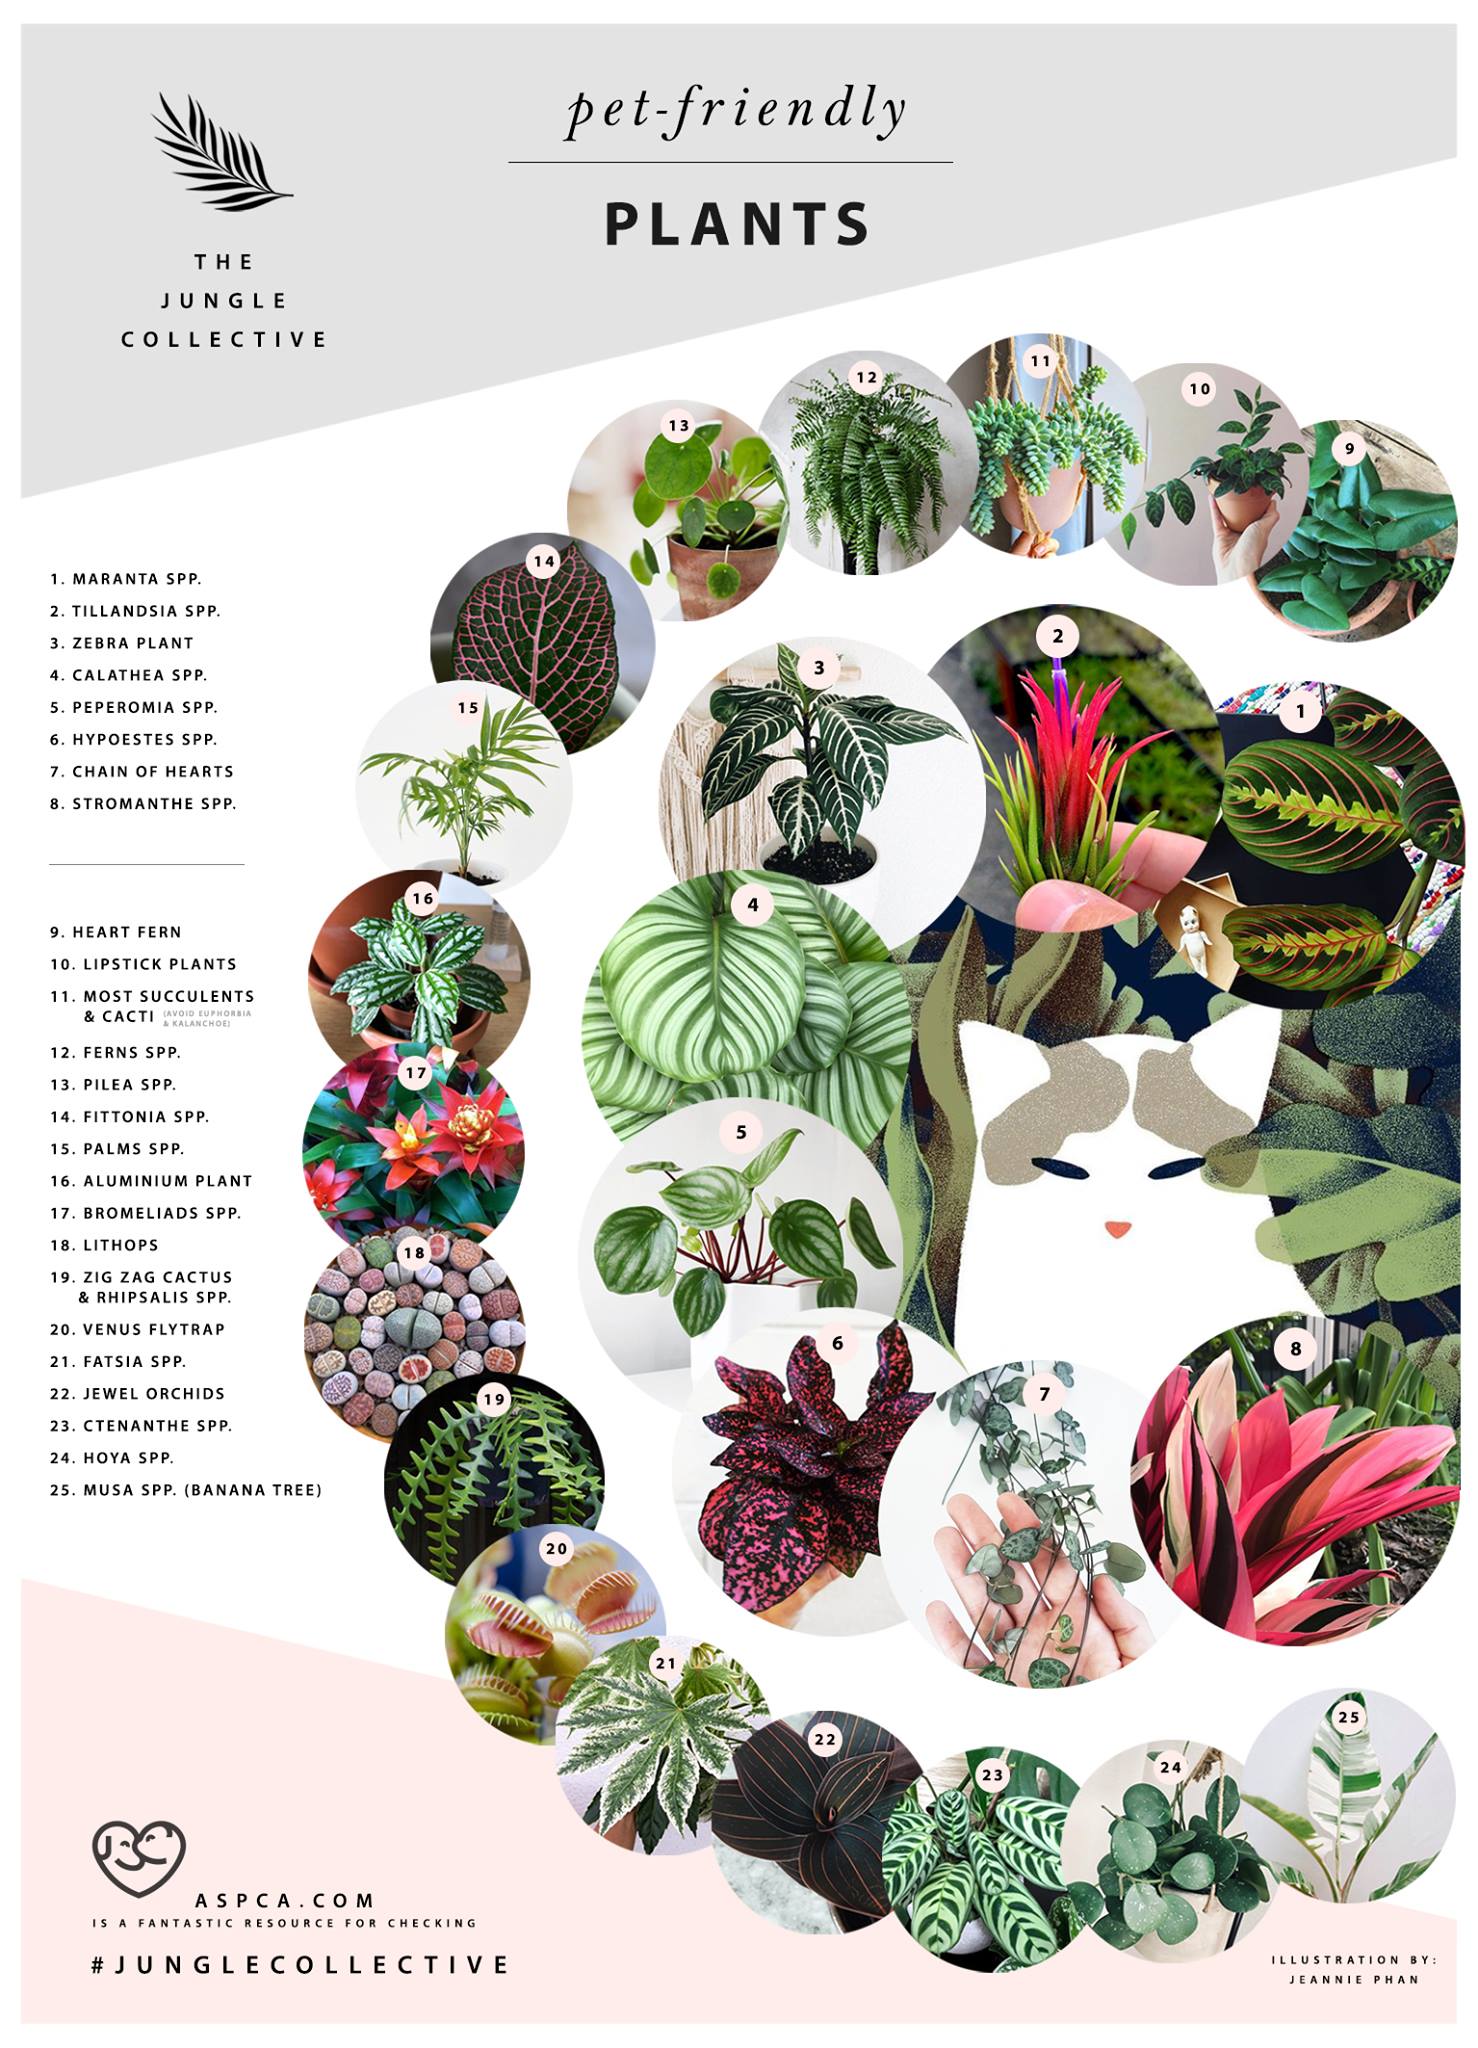 The Jungle Collective | Pet Friendly Plants – The Jungle Collective